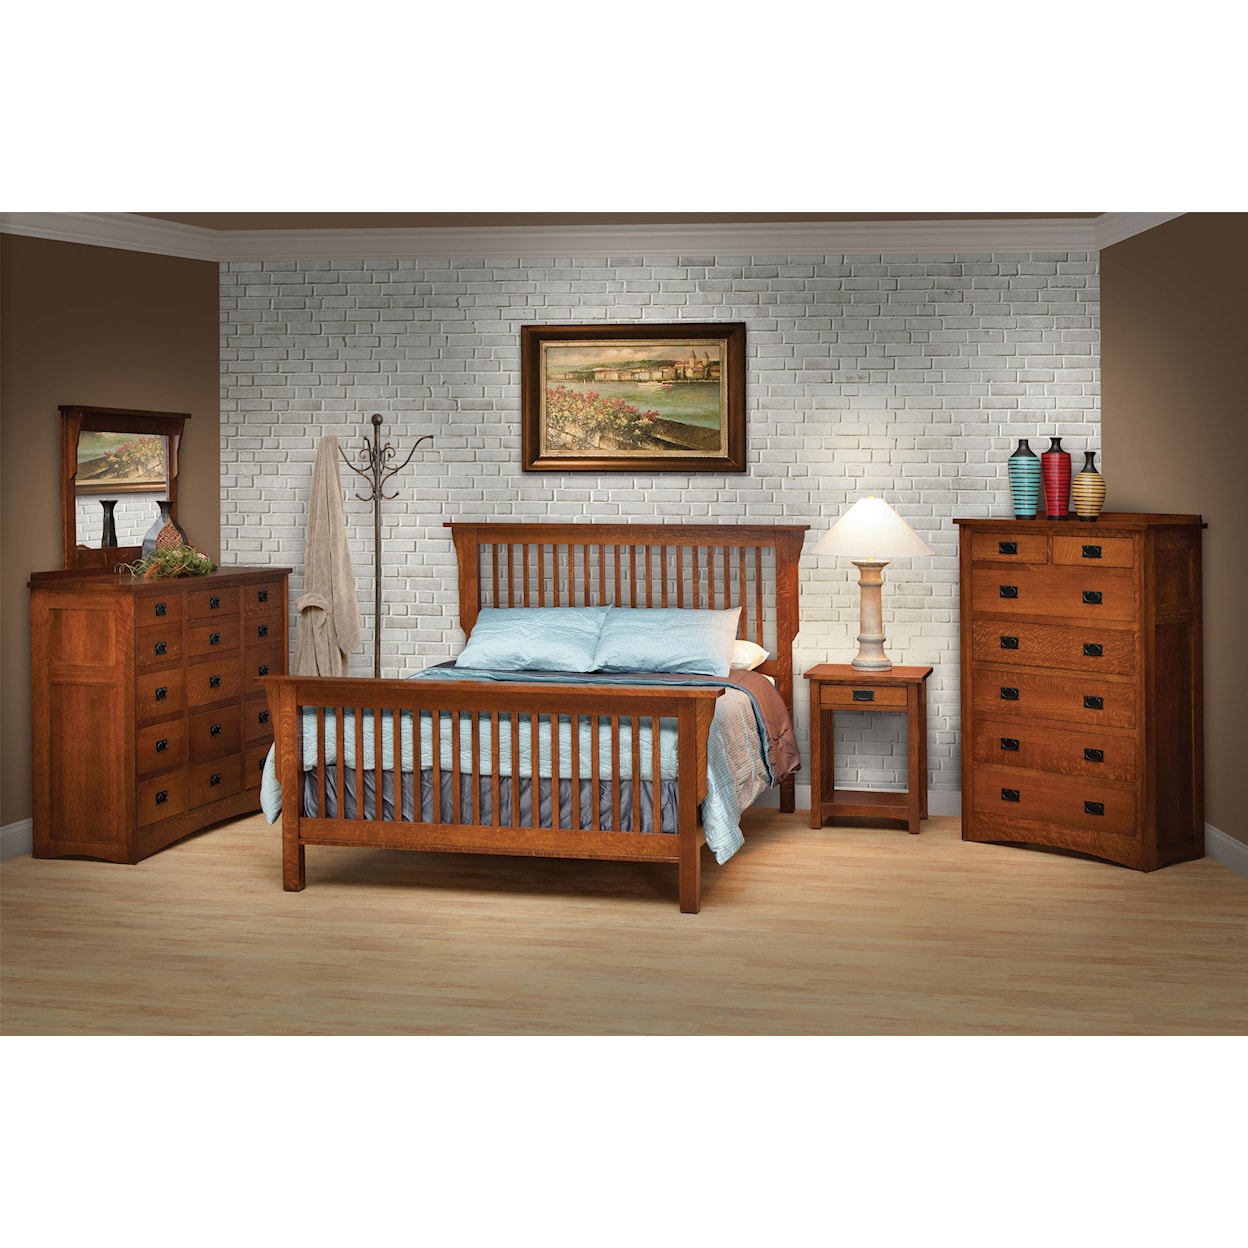 Daniel's Amish Mission Queen Bedroom Group